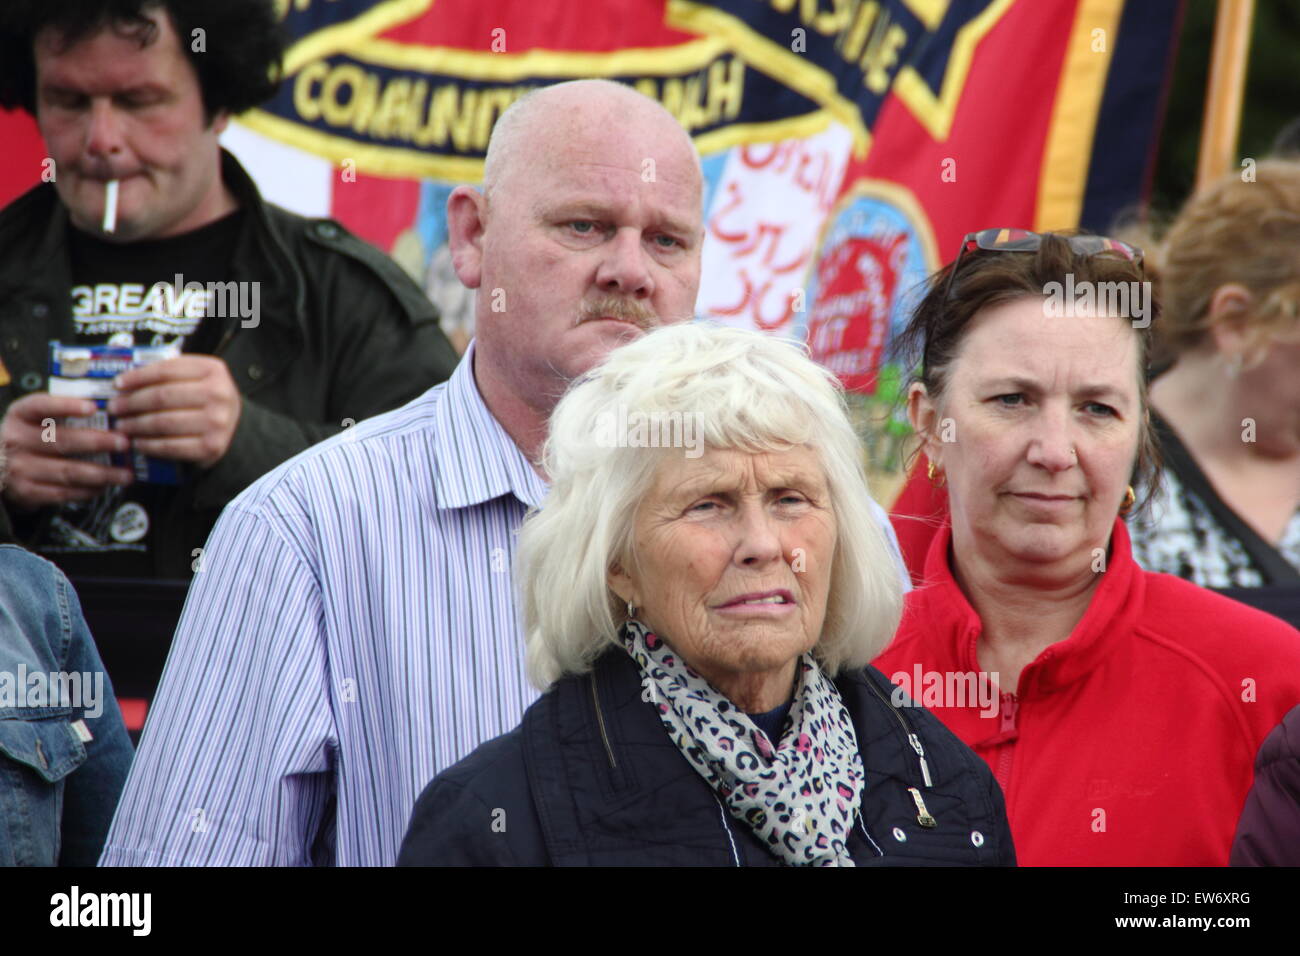 Orgreave, South Yorkshire, UK. 18 June 2015. Anne Scargill (centre front), former wife of miners’ strike leader, Arthur Scargill attends a rally organised by the Orgreave Truth and Justice Campaign (OTJC) at Orgreave to mark the 31st anniversary of the Battle of Orgreave, a violent confrontation between miners and police that took place during the year long miners’ strike in 1984-85. Credit:  Deborah Vernon/Alamy Live News Stock Photo